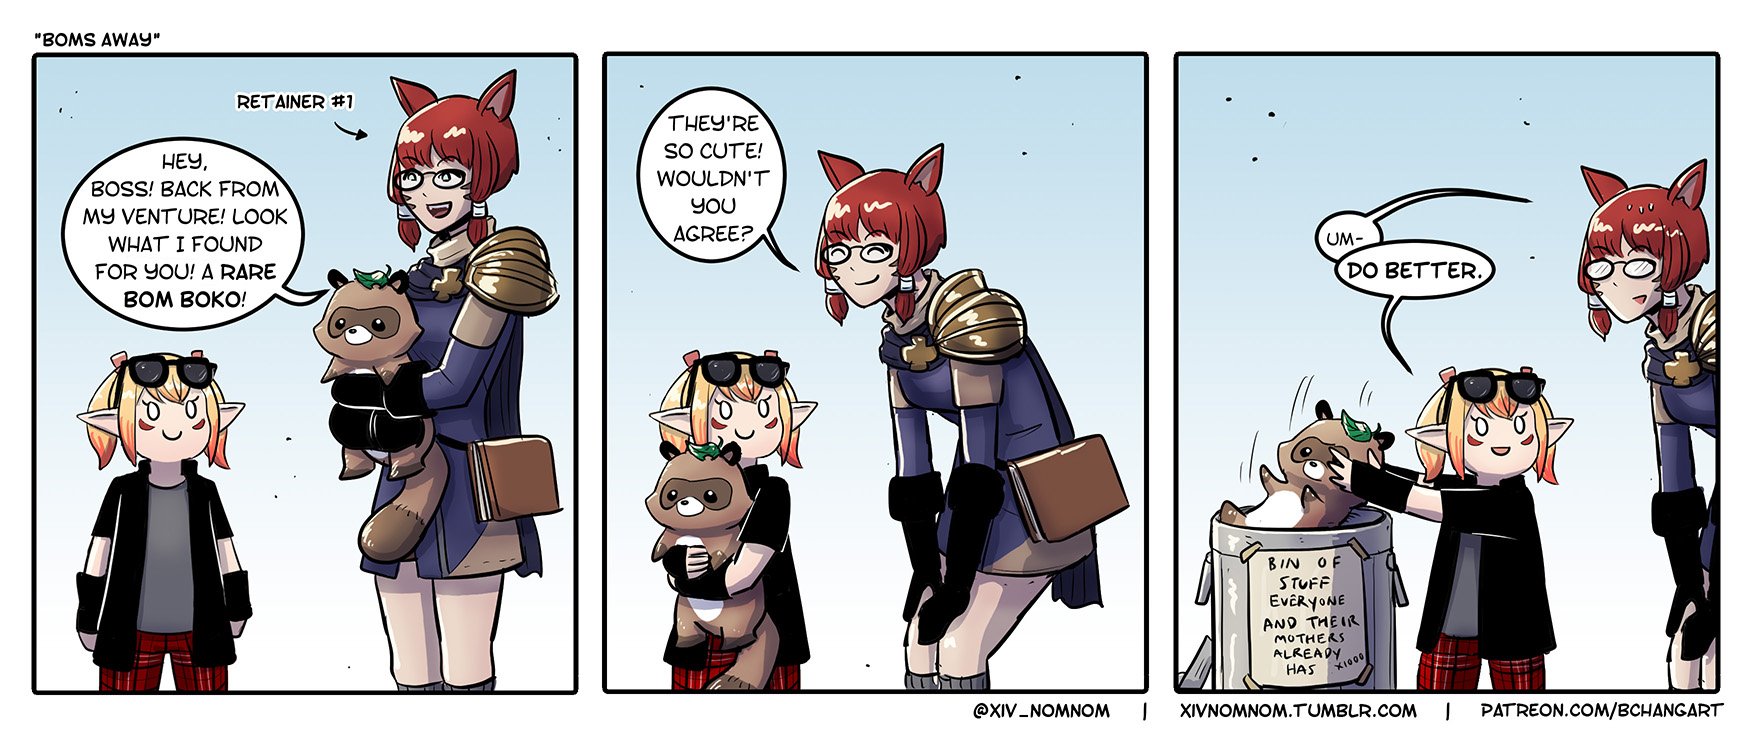 Tom Nomnom Boms Away Ffxiv Ff14 If You Enjoy These Comics Please Consider Supporting Me On Patreon T Co Ktatcvrzmc Much Love T Co Ffn6z0zv7w Twitter